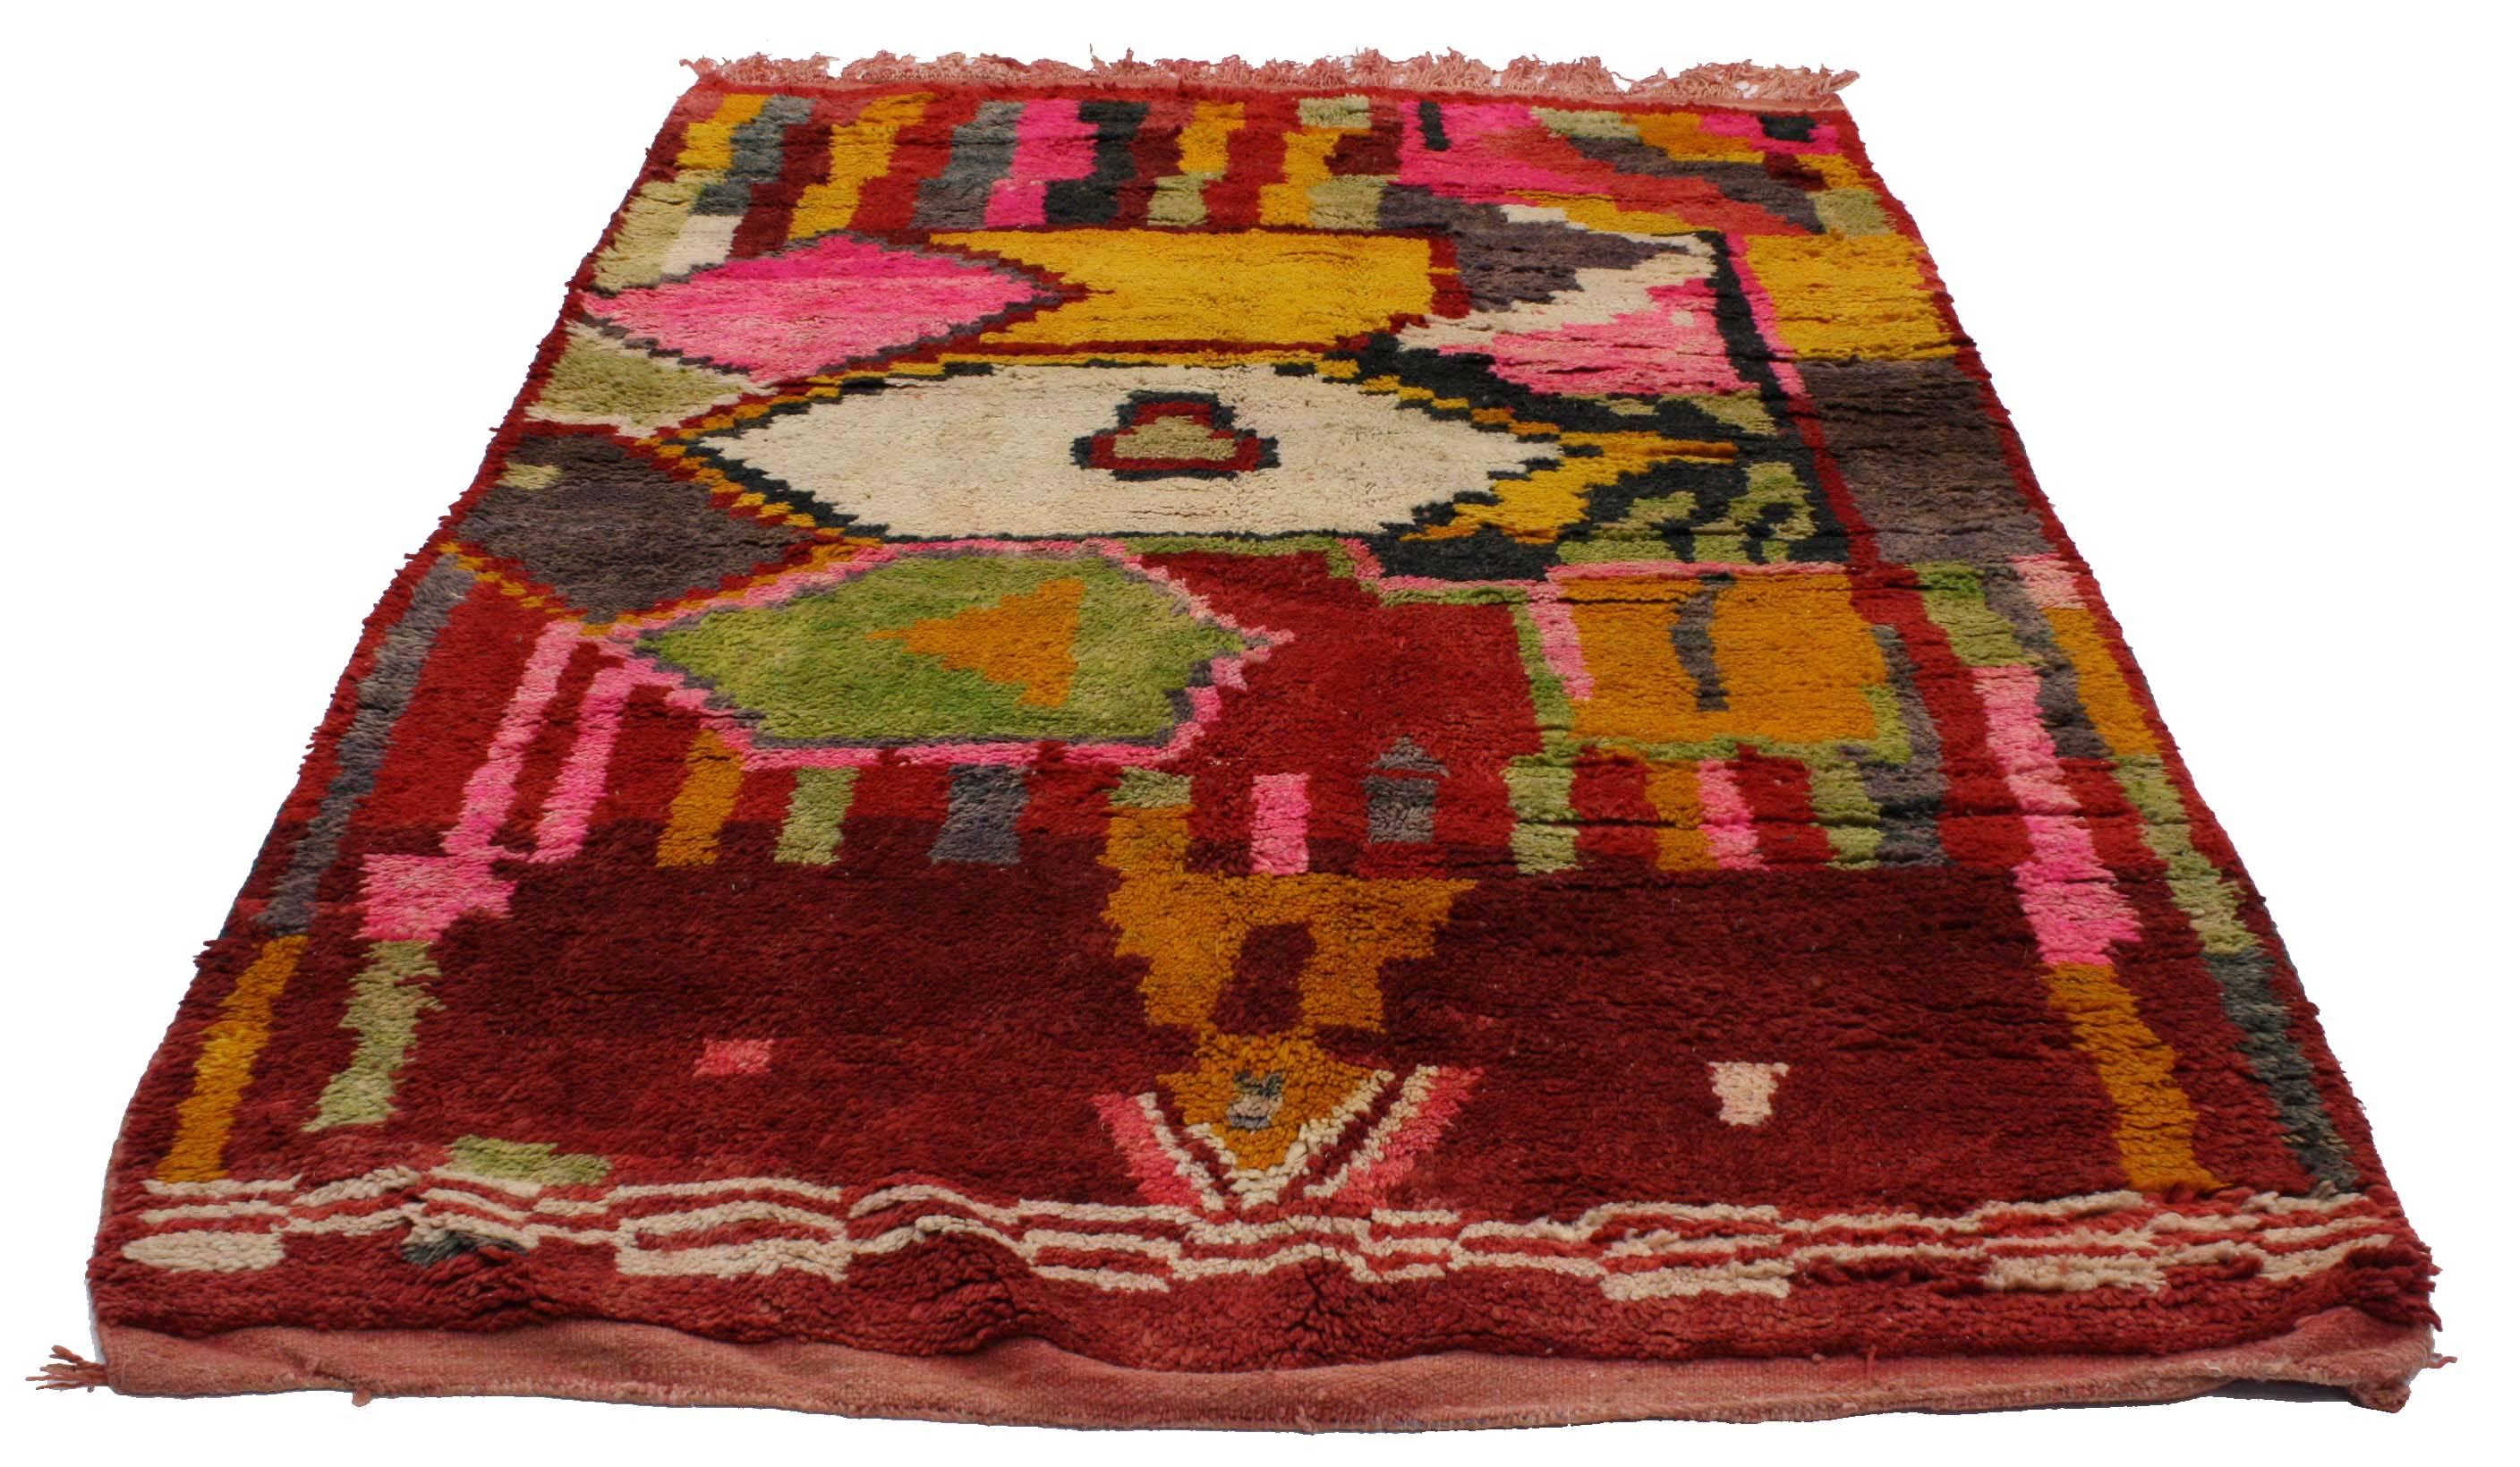 20300, Vintage Berber Moroccan Rehamna Rug With Cubism Bauhaus Style. This hand-knotted wool vintage Berber Moroccan rug is a striking example of the Berber tribe and their weaving skills. An array of geometric shapes from diamonds to trapezoids